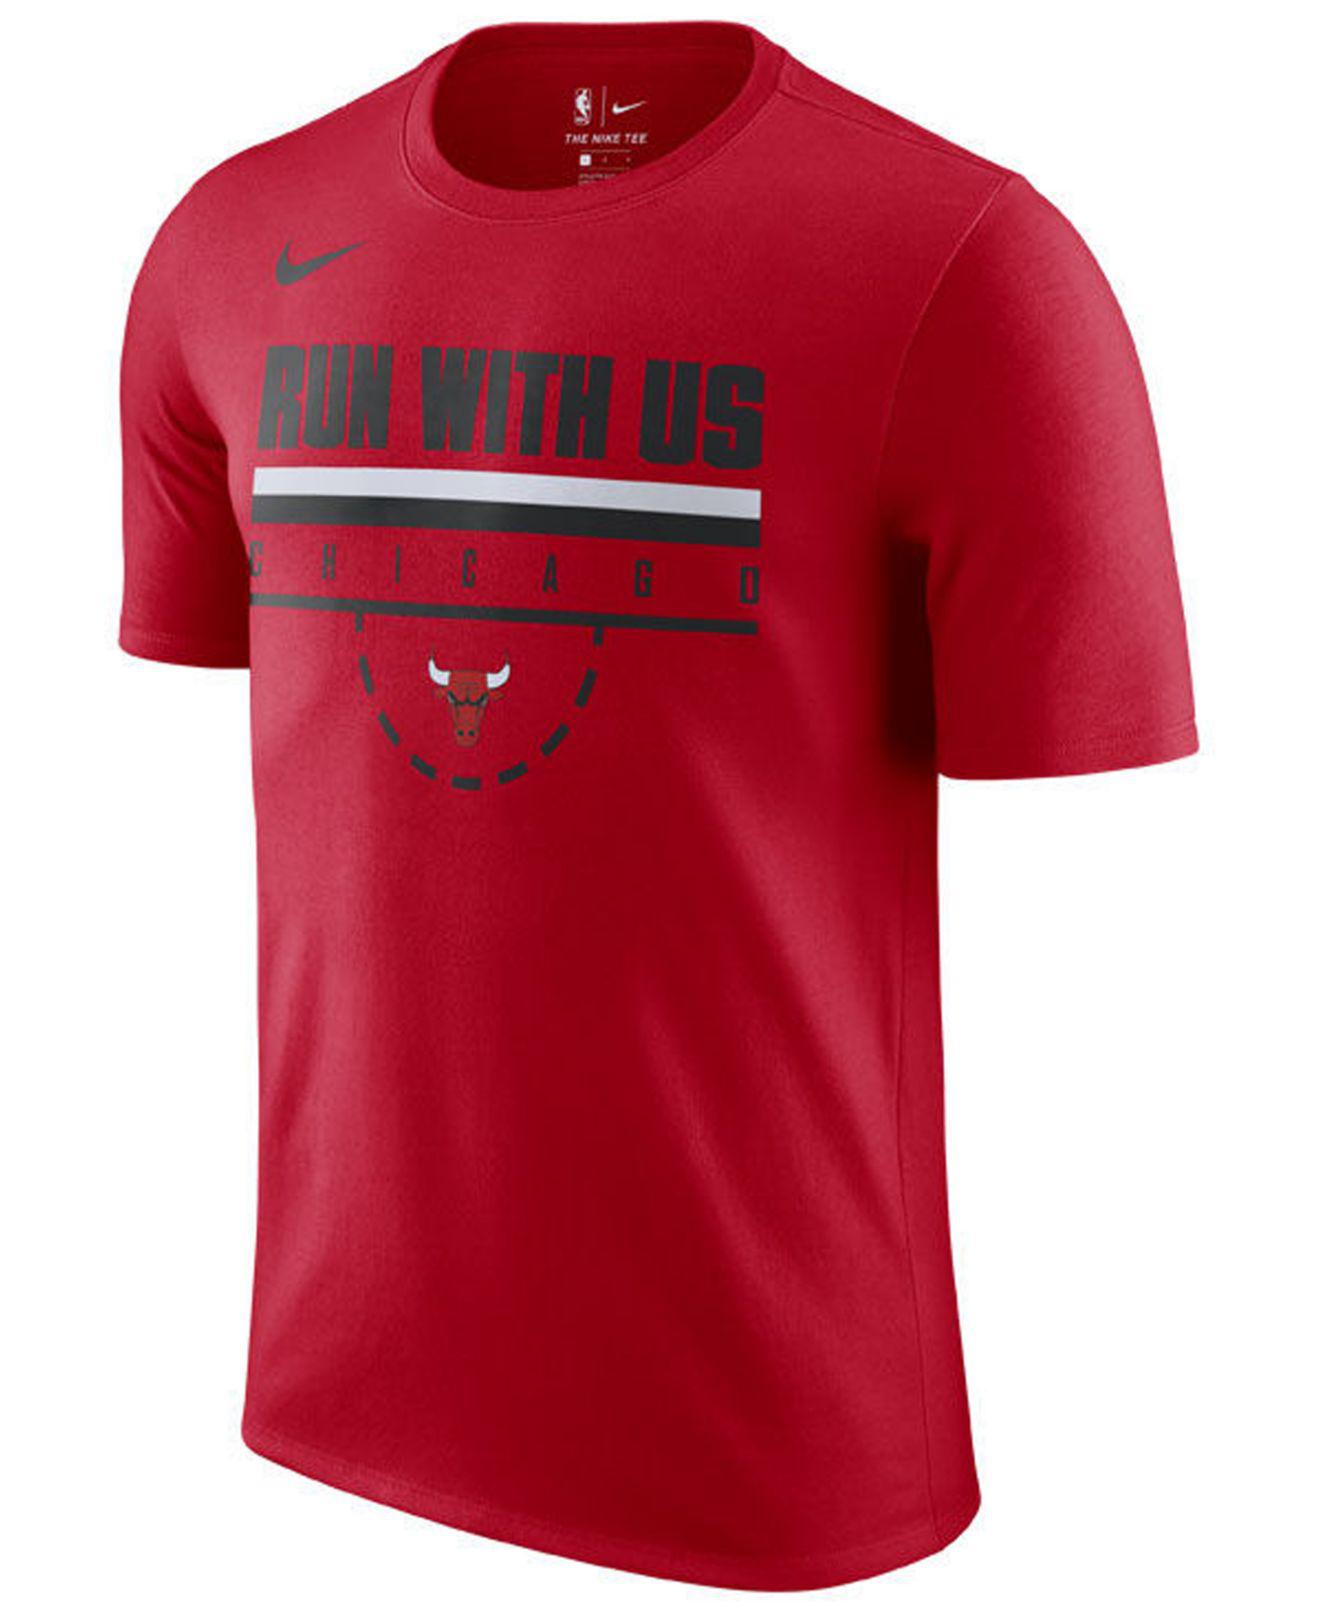 Lyst - Nike Chicago Bulls Team Verbiage T-shirt in Red for Men